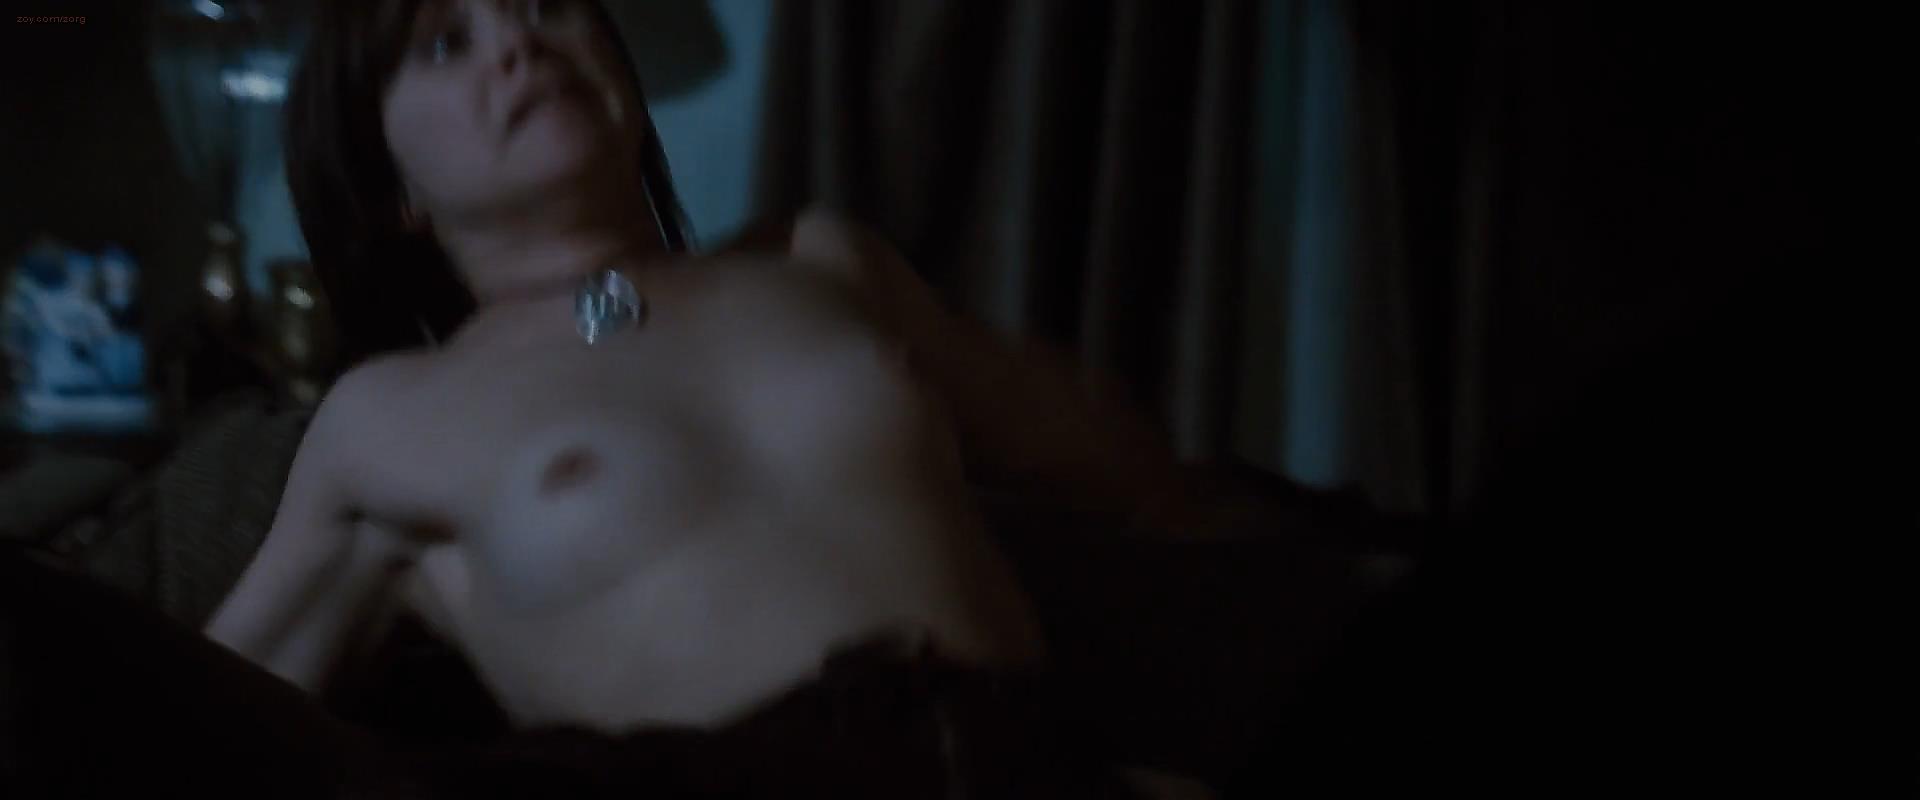 Danielle harris nude, sexy, the fappening, uncensored